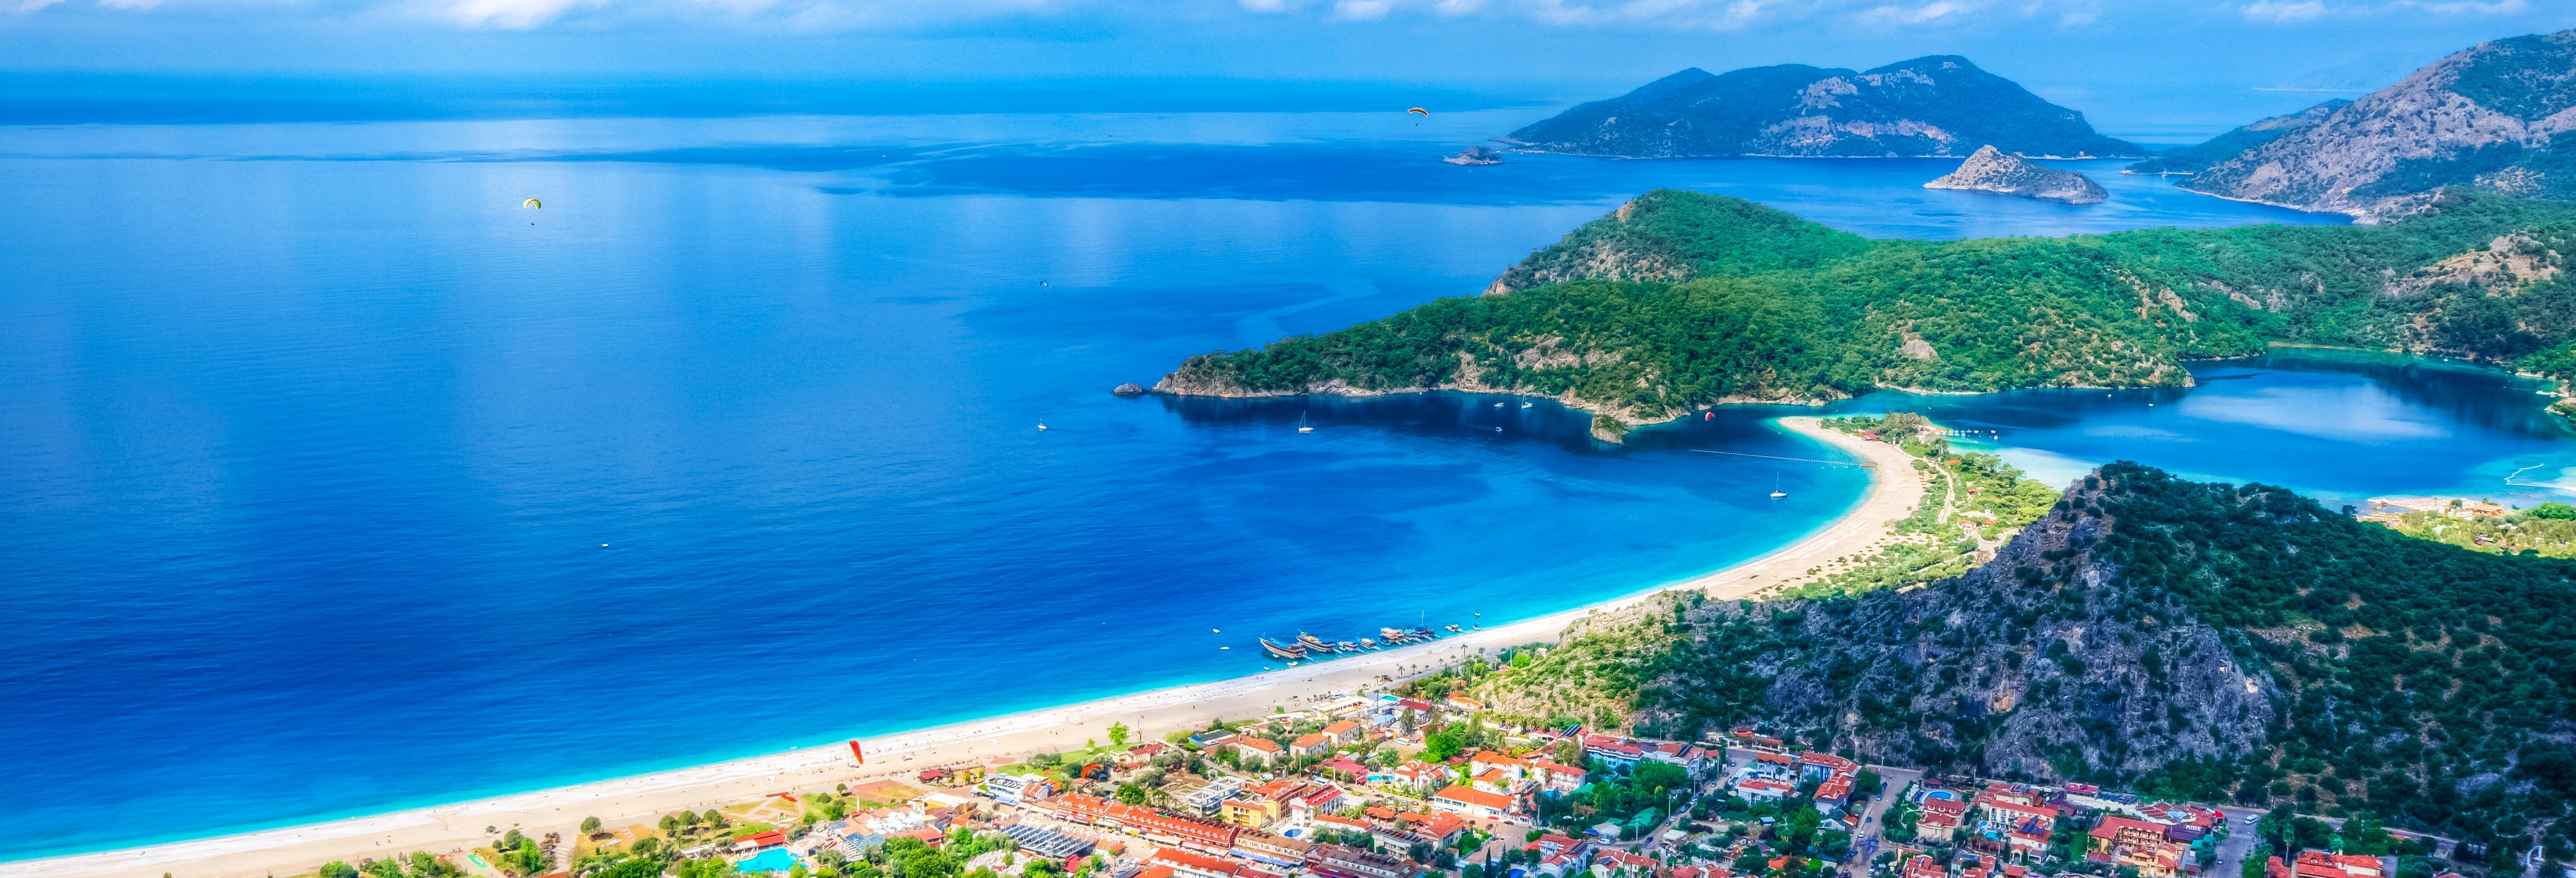 best day trips from fethiye